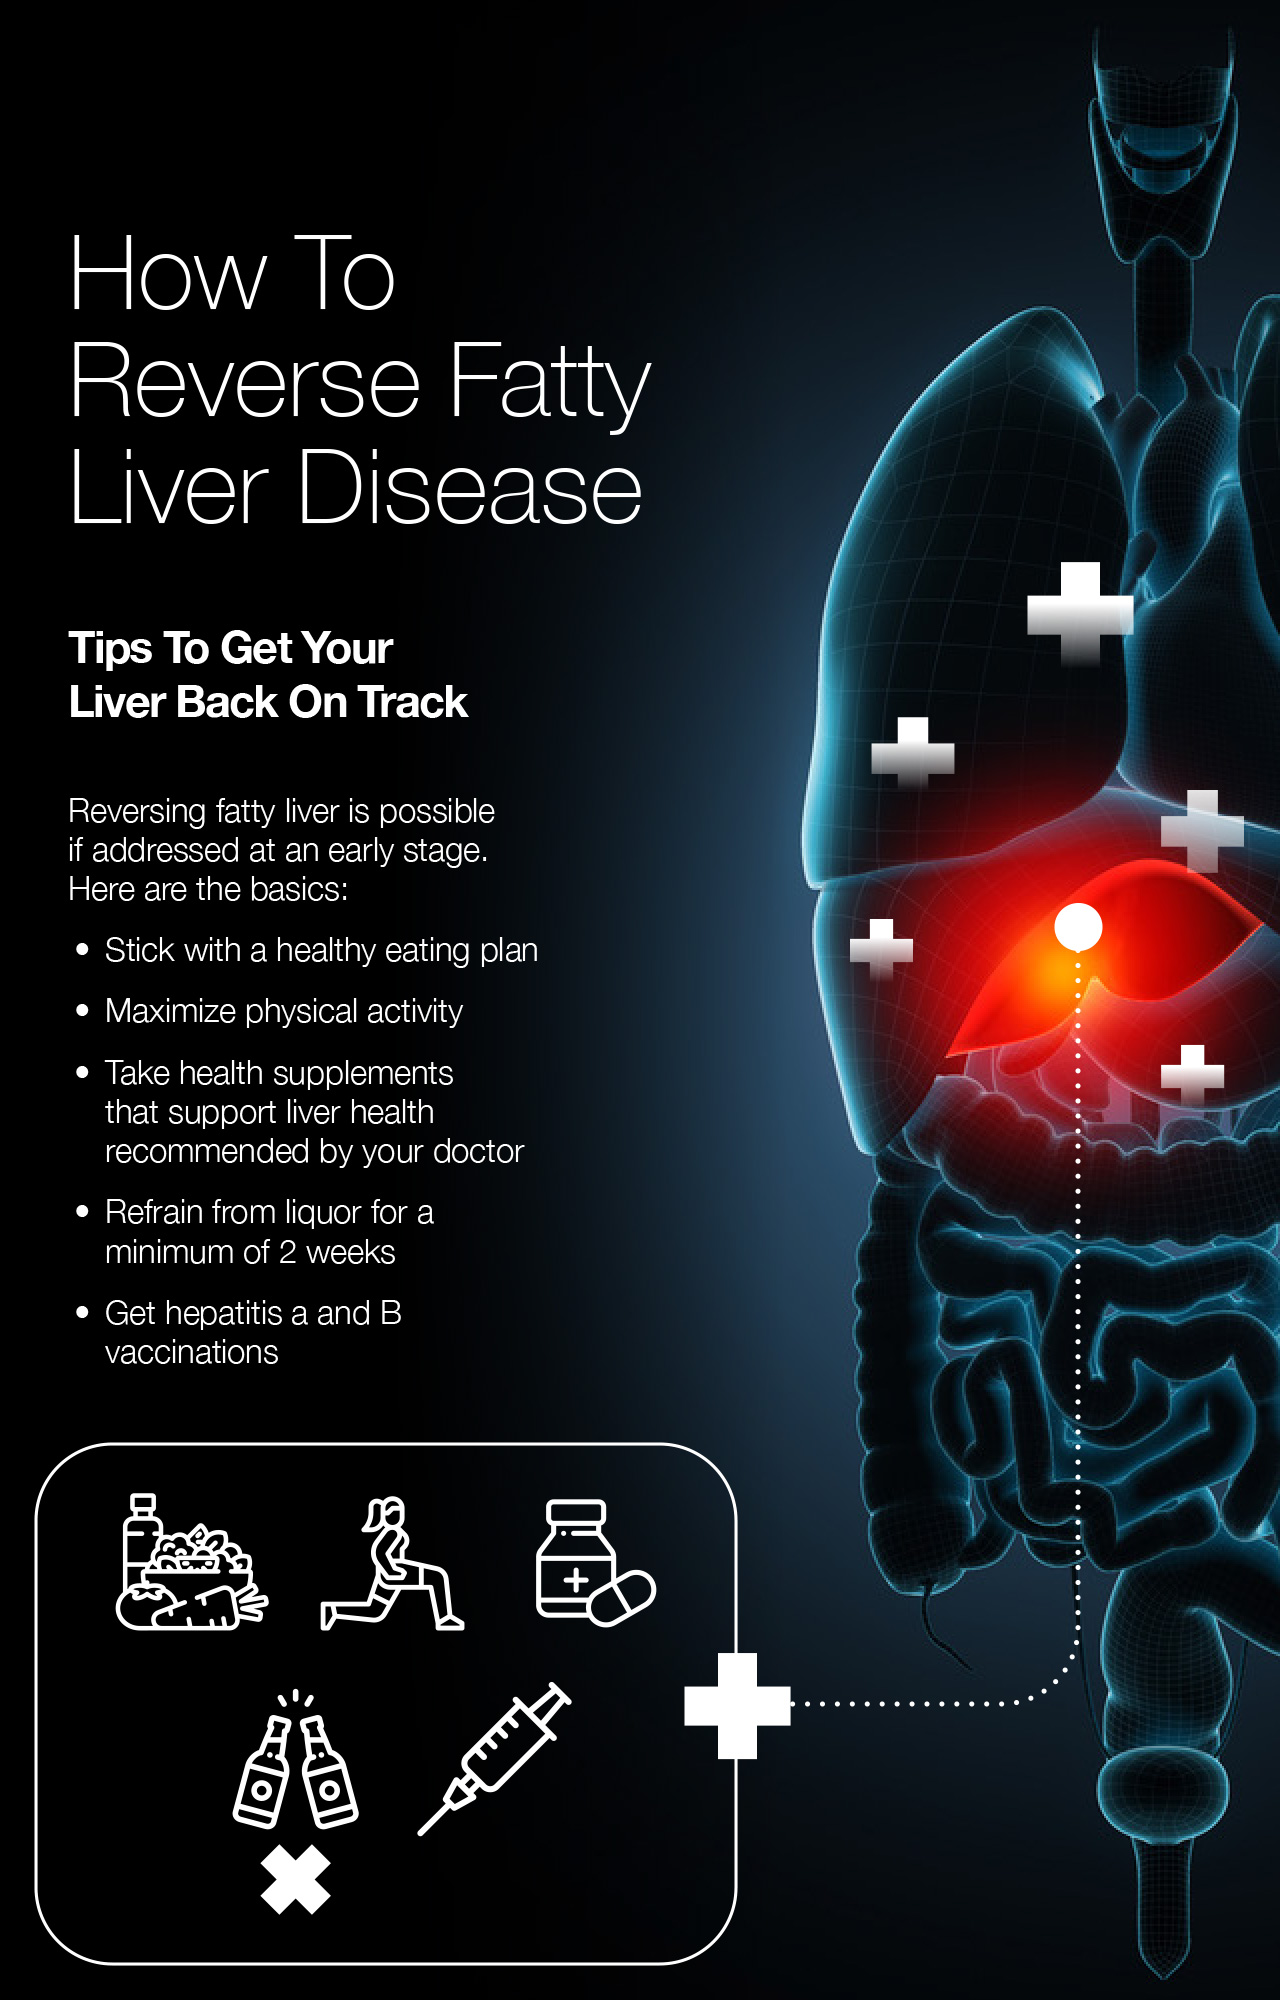 How To Reverse Fatty Liver Disease